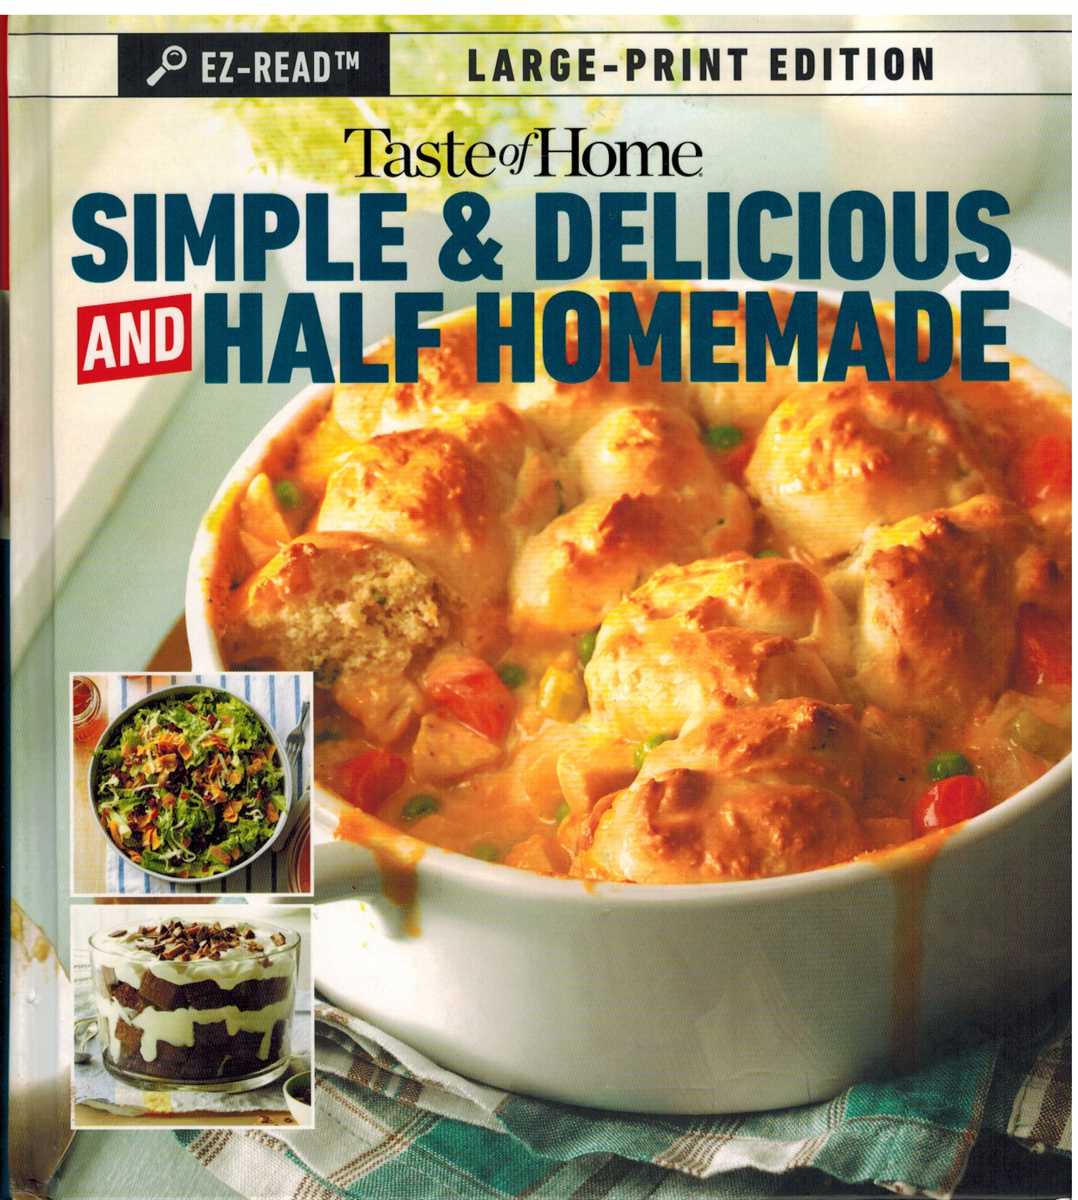 Taste Of Home - SIMPLE & DELICIOUS AND HALF HOMEMADE Two Volumes in One